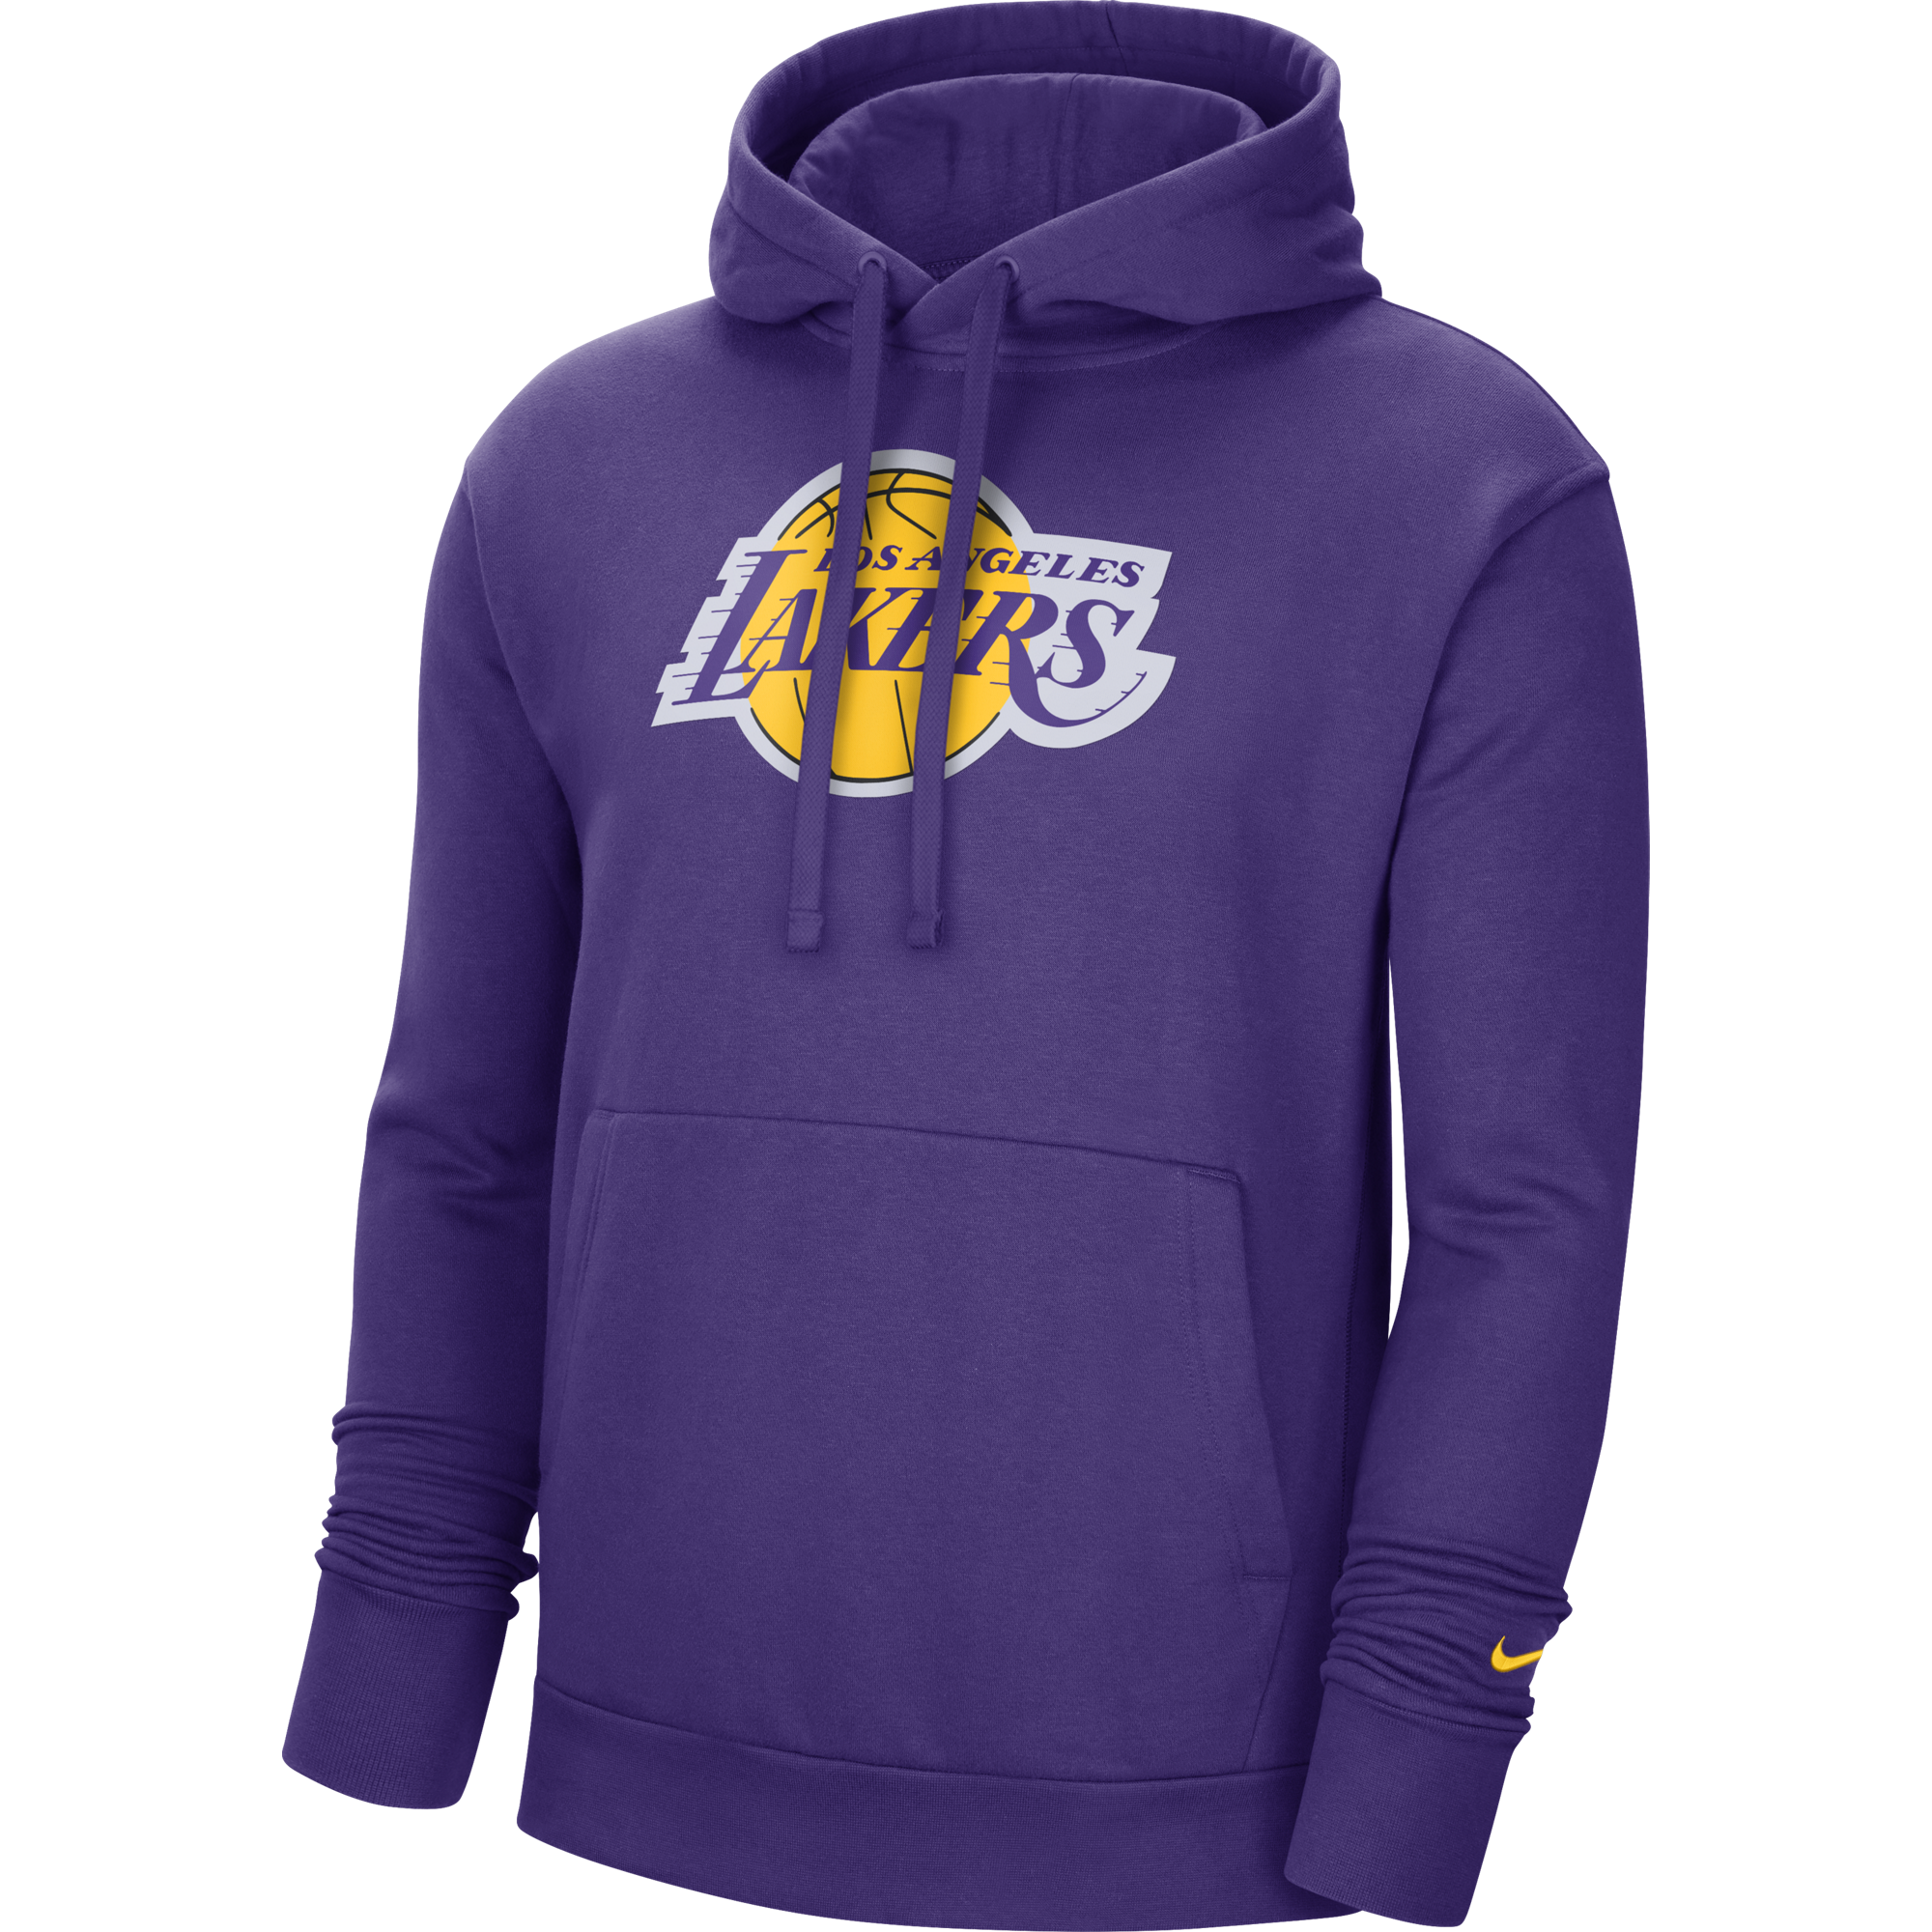 sweater lakers